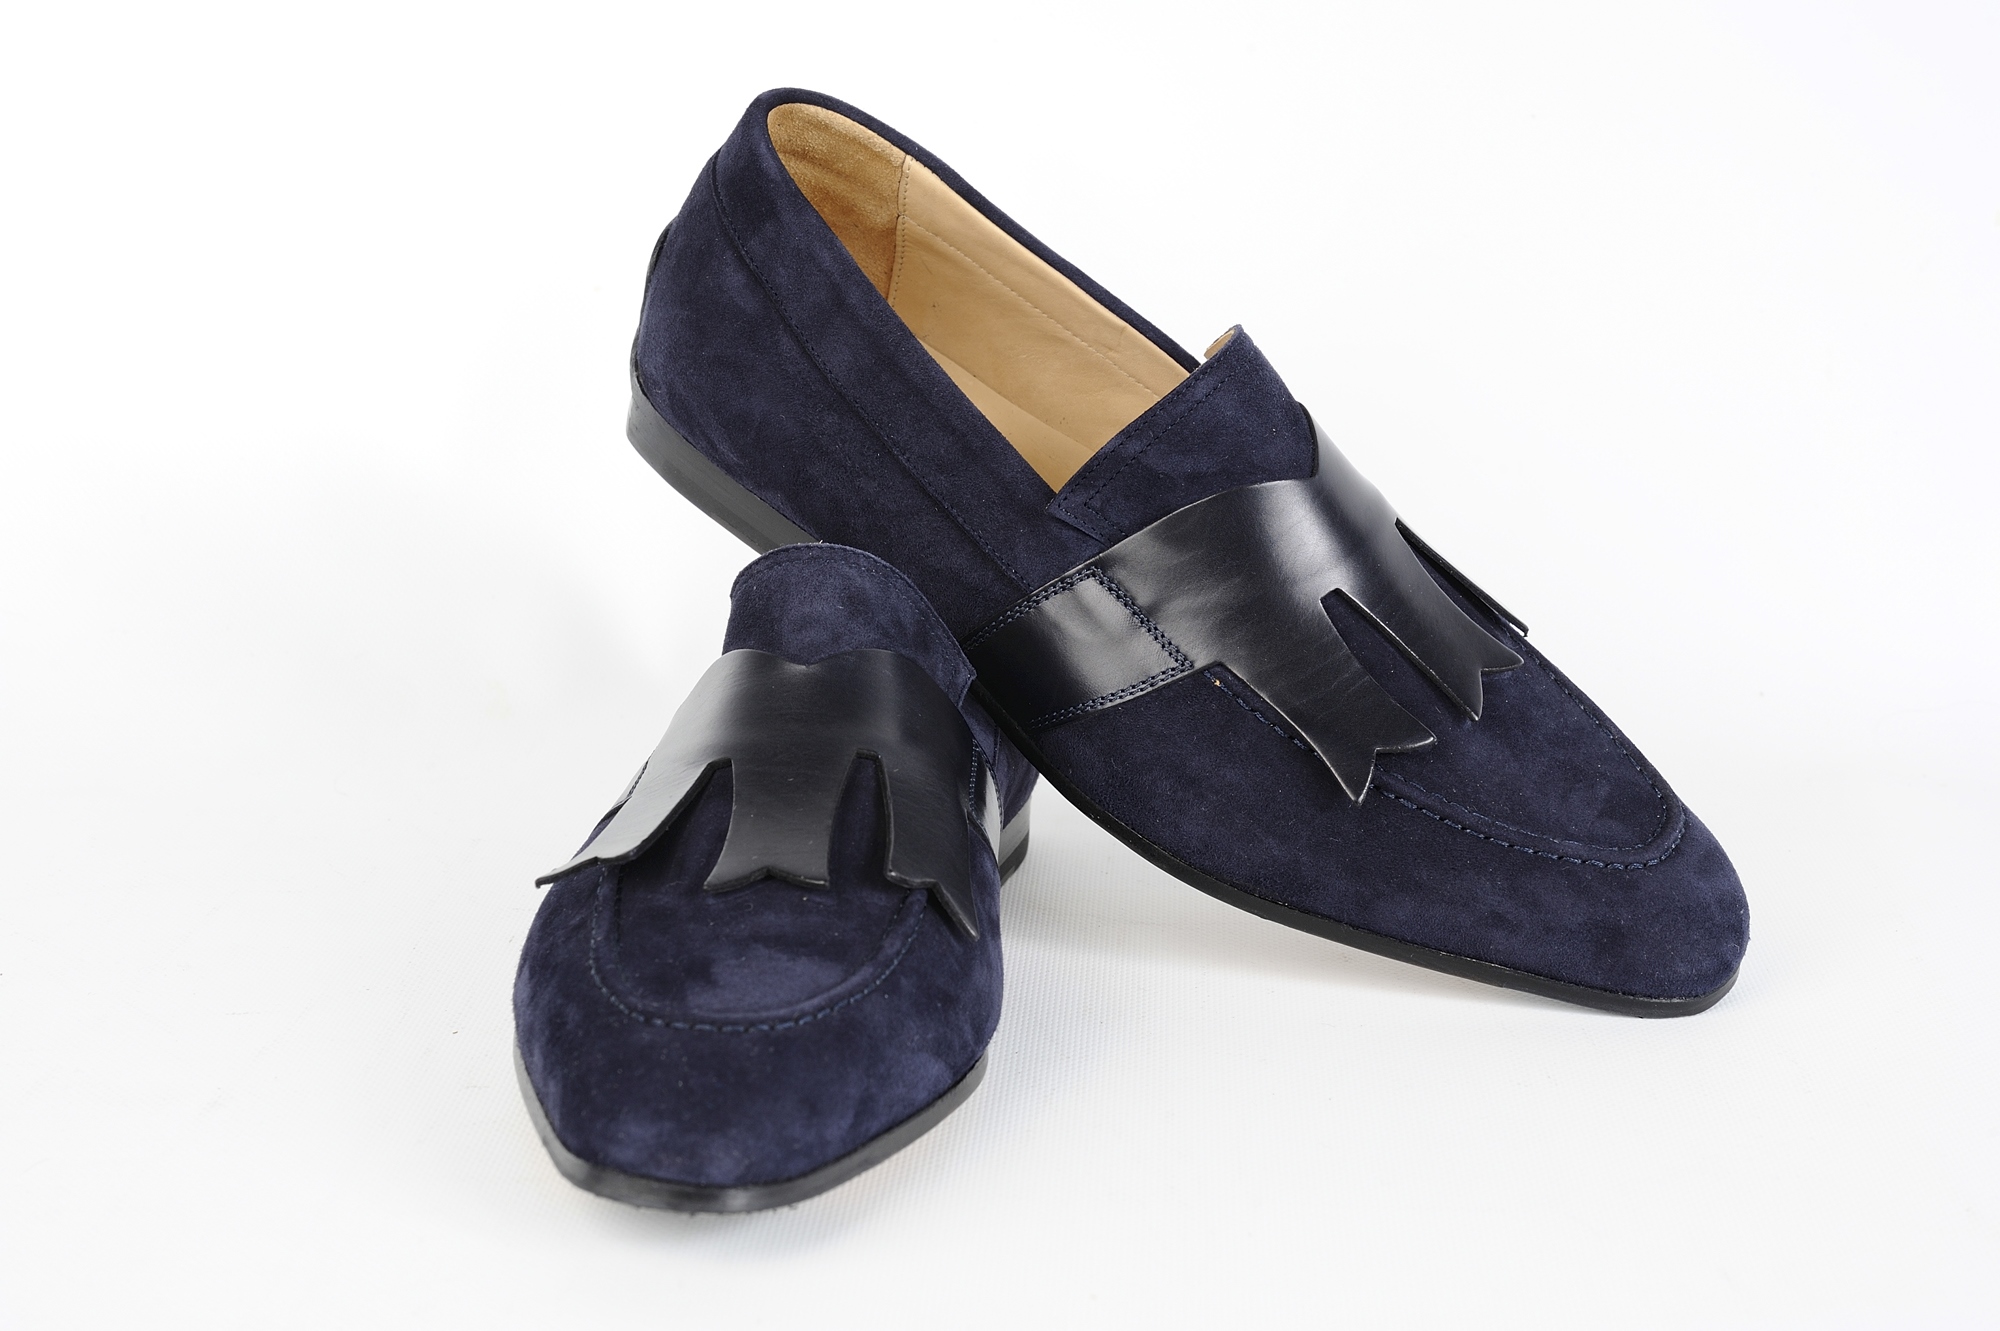 tobia longarini footwear crafted leather artur suede